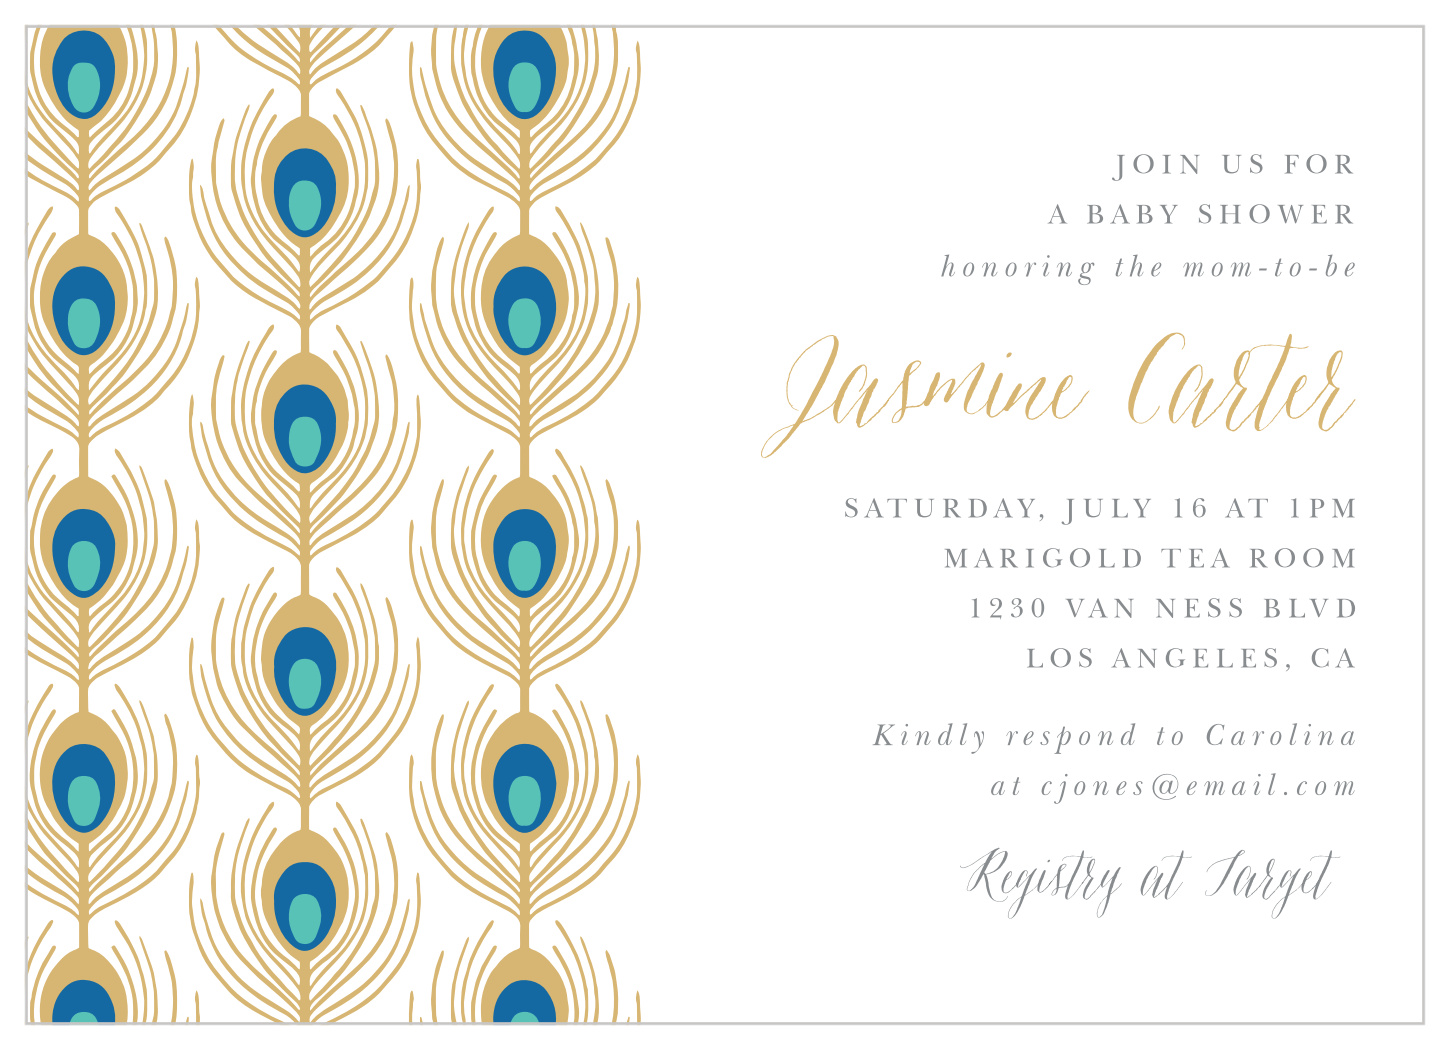 Pregnant Peacock Baby Shower Invitations